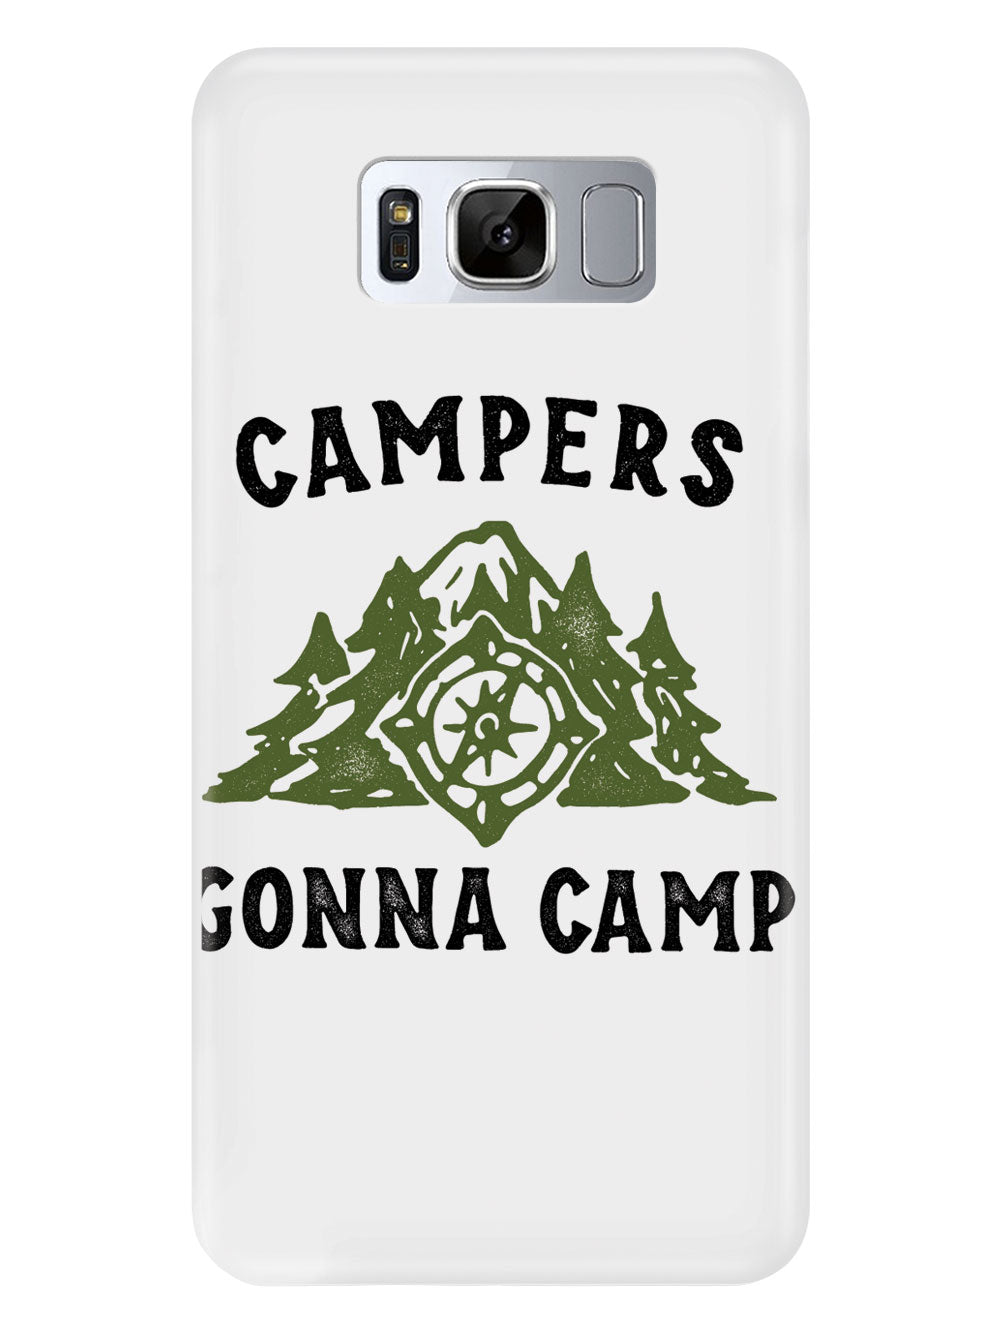 Campers Gonna Camp - White Case